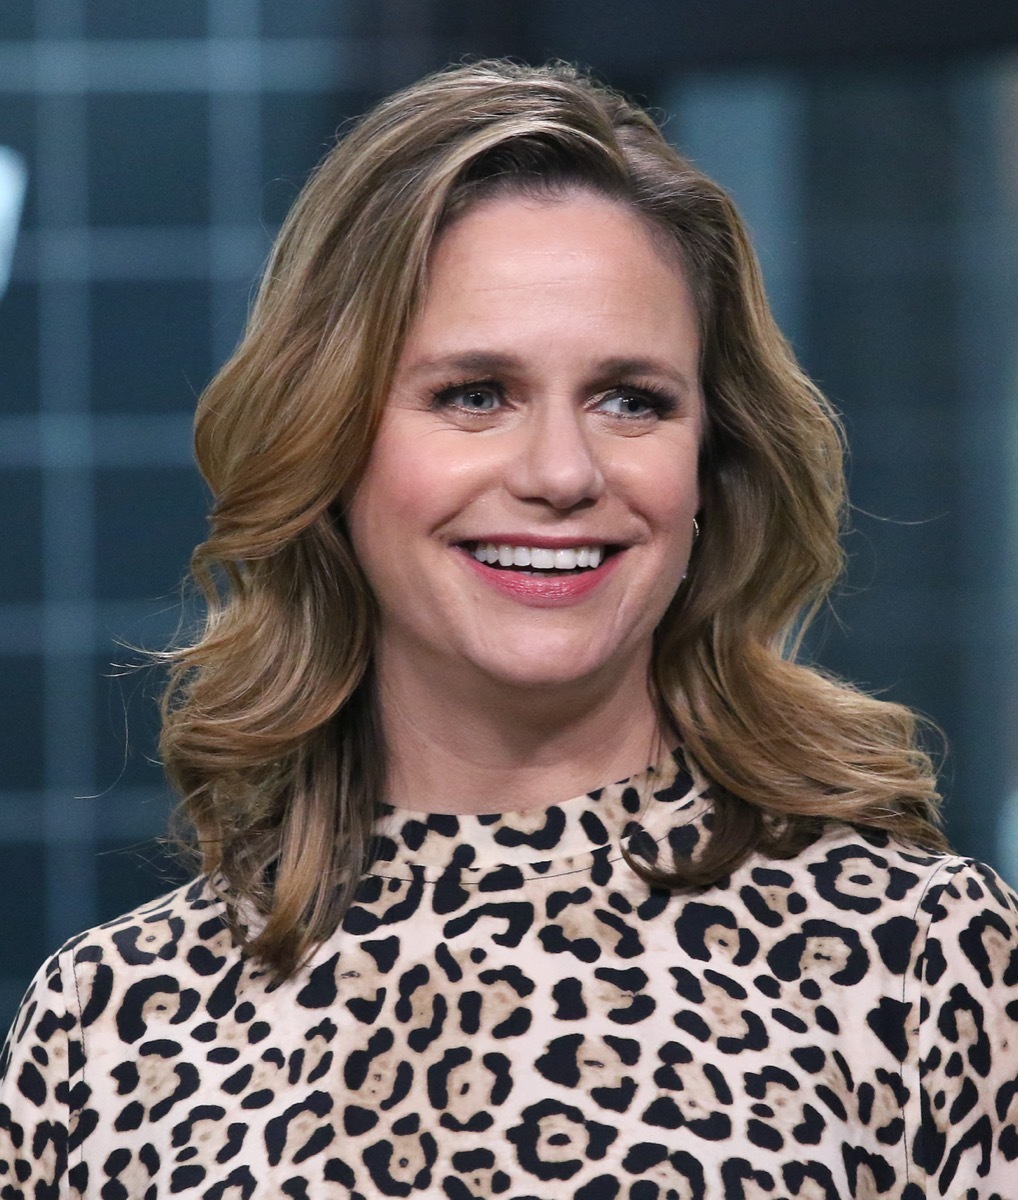 Andrea Barber at Build Series in 2019